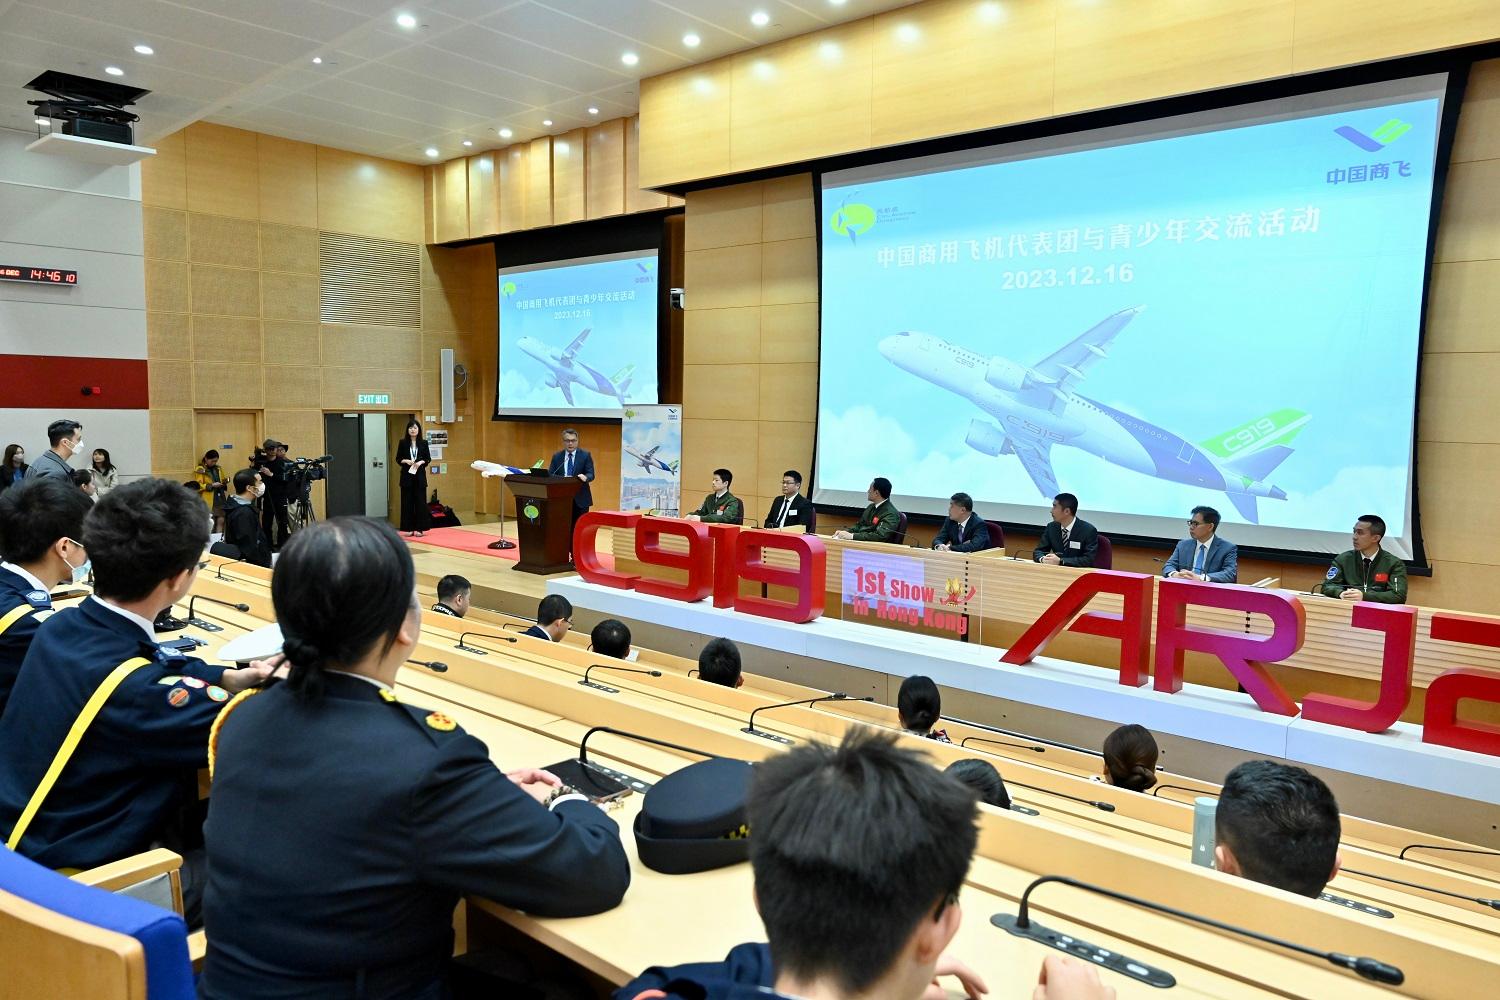 The flight demonstration of home-grown aircraft C919 concluded successfully this morning (December 16). After the flight demonstration, representatives from the Commercial Aircraft Corporation of China, Ltd were invited to meet and interact with young people at the Civil Aviation Department Headquarters. Photo shows Director-General of Civil Aviation, Mr Victor Liu (front row, second left), speaking at the event.